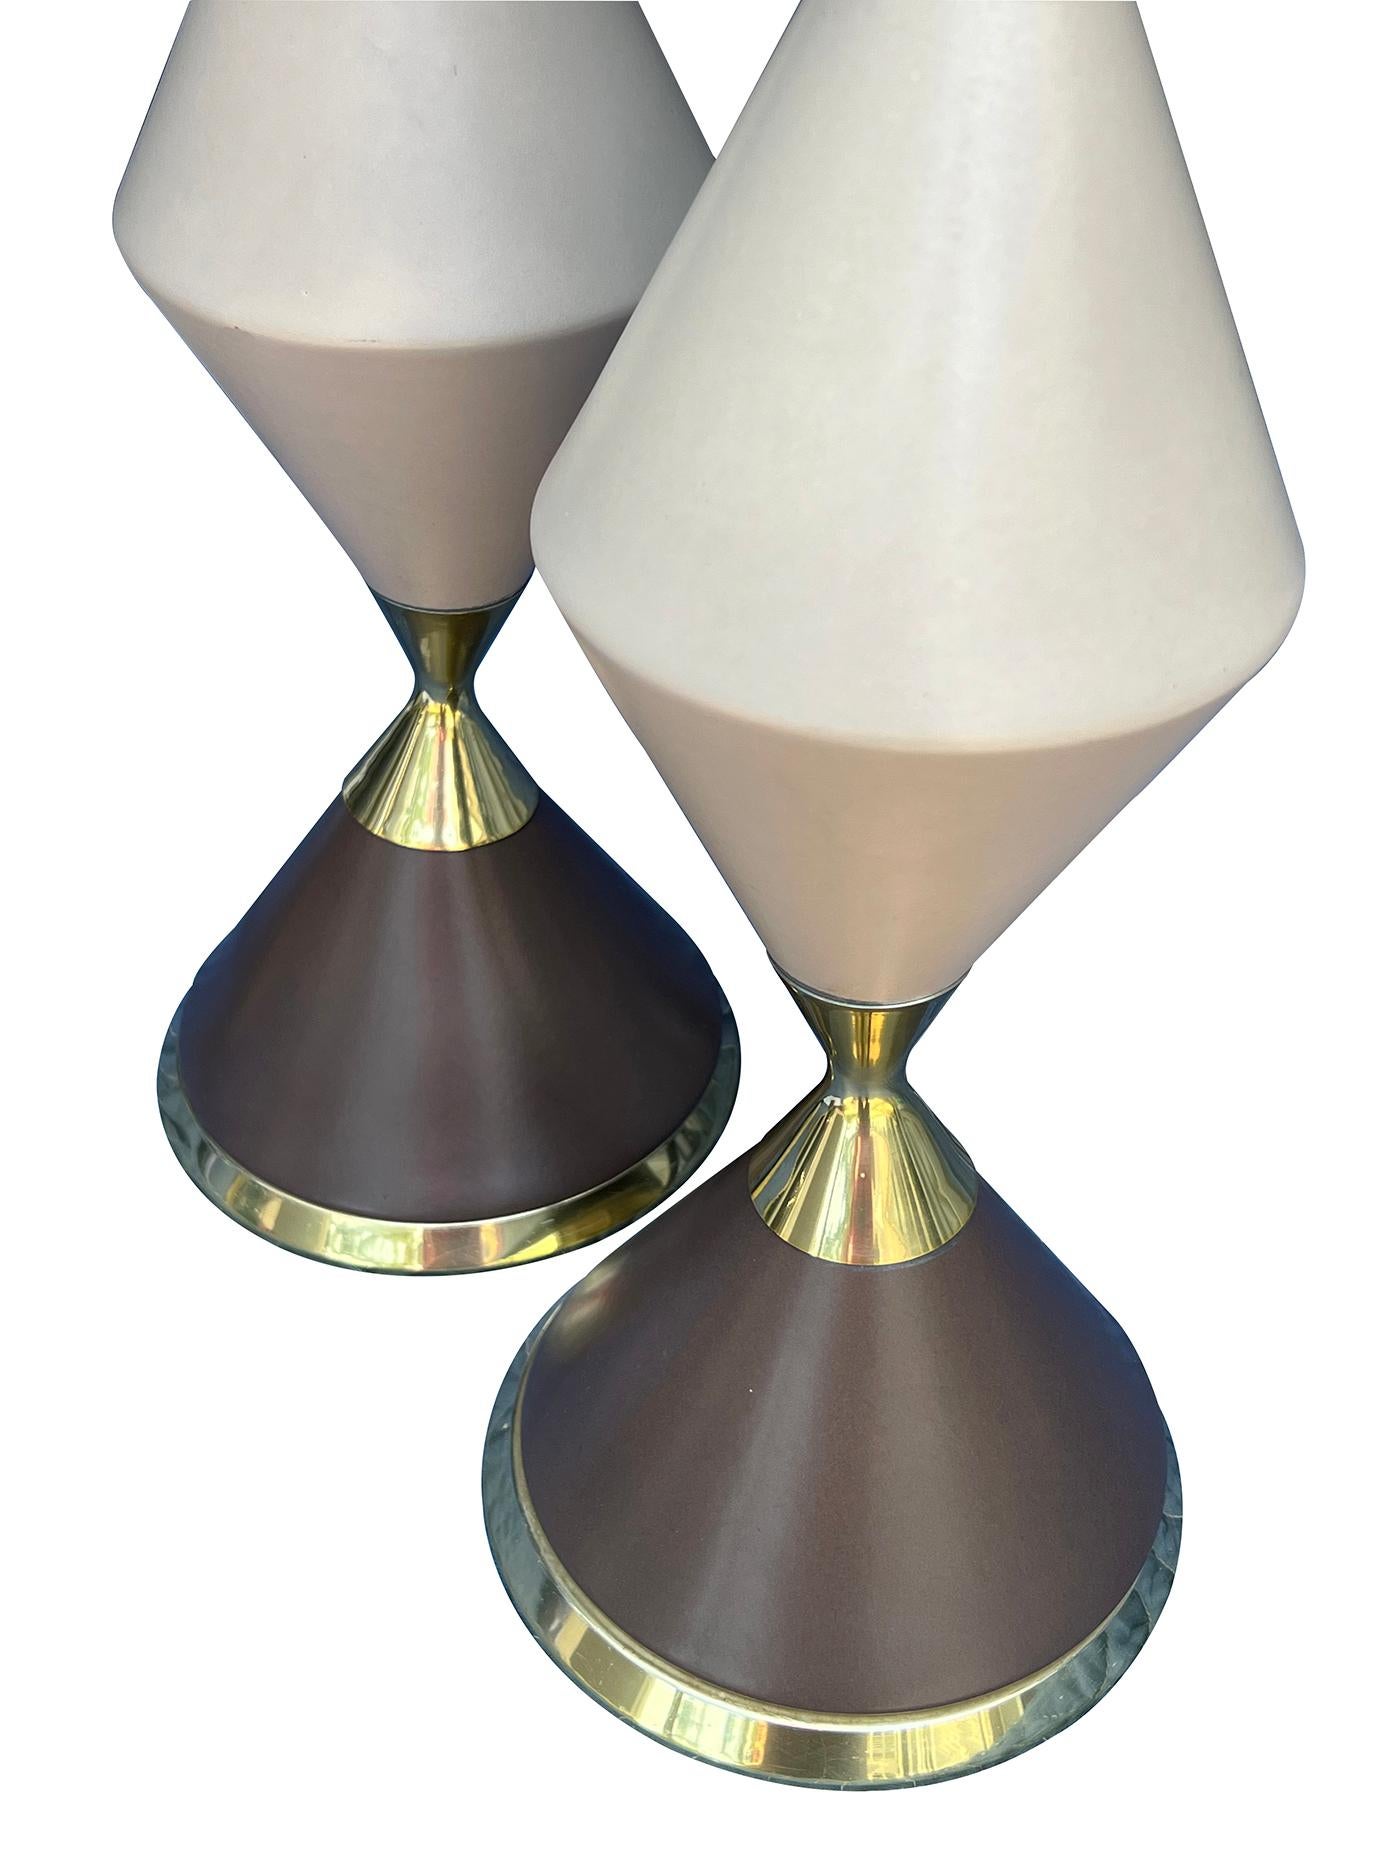 Glazed Pair of Gerald Thurston 1950s Hourglass Tri-color Ceramic Lamps For Sale